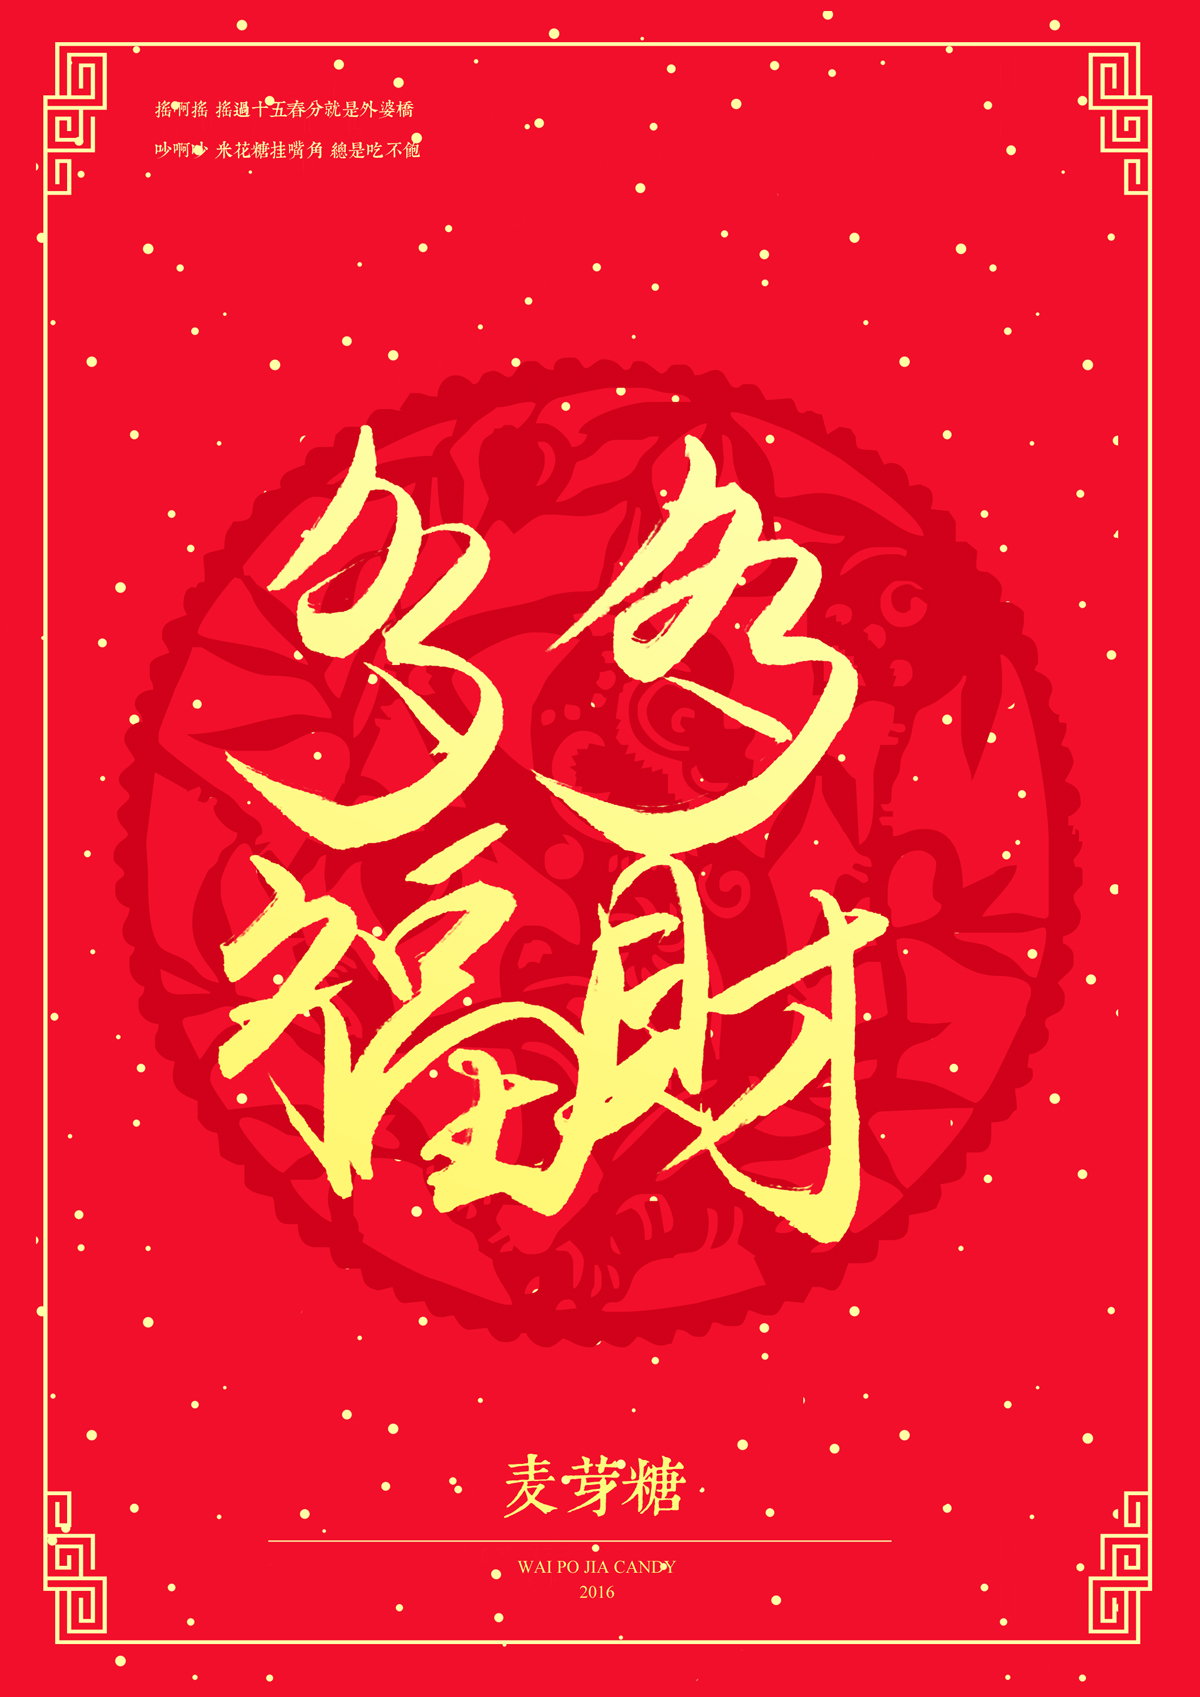 Kung Hei Fat Choy(May you be happy and prosperous) Poster design PSD File Free Download